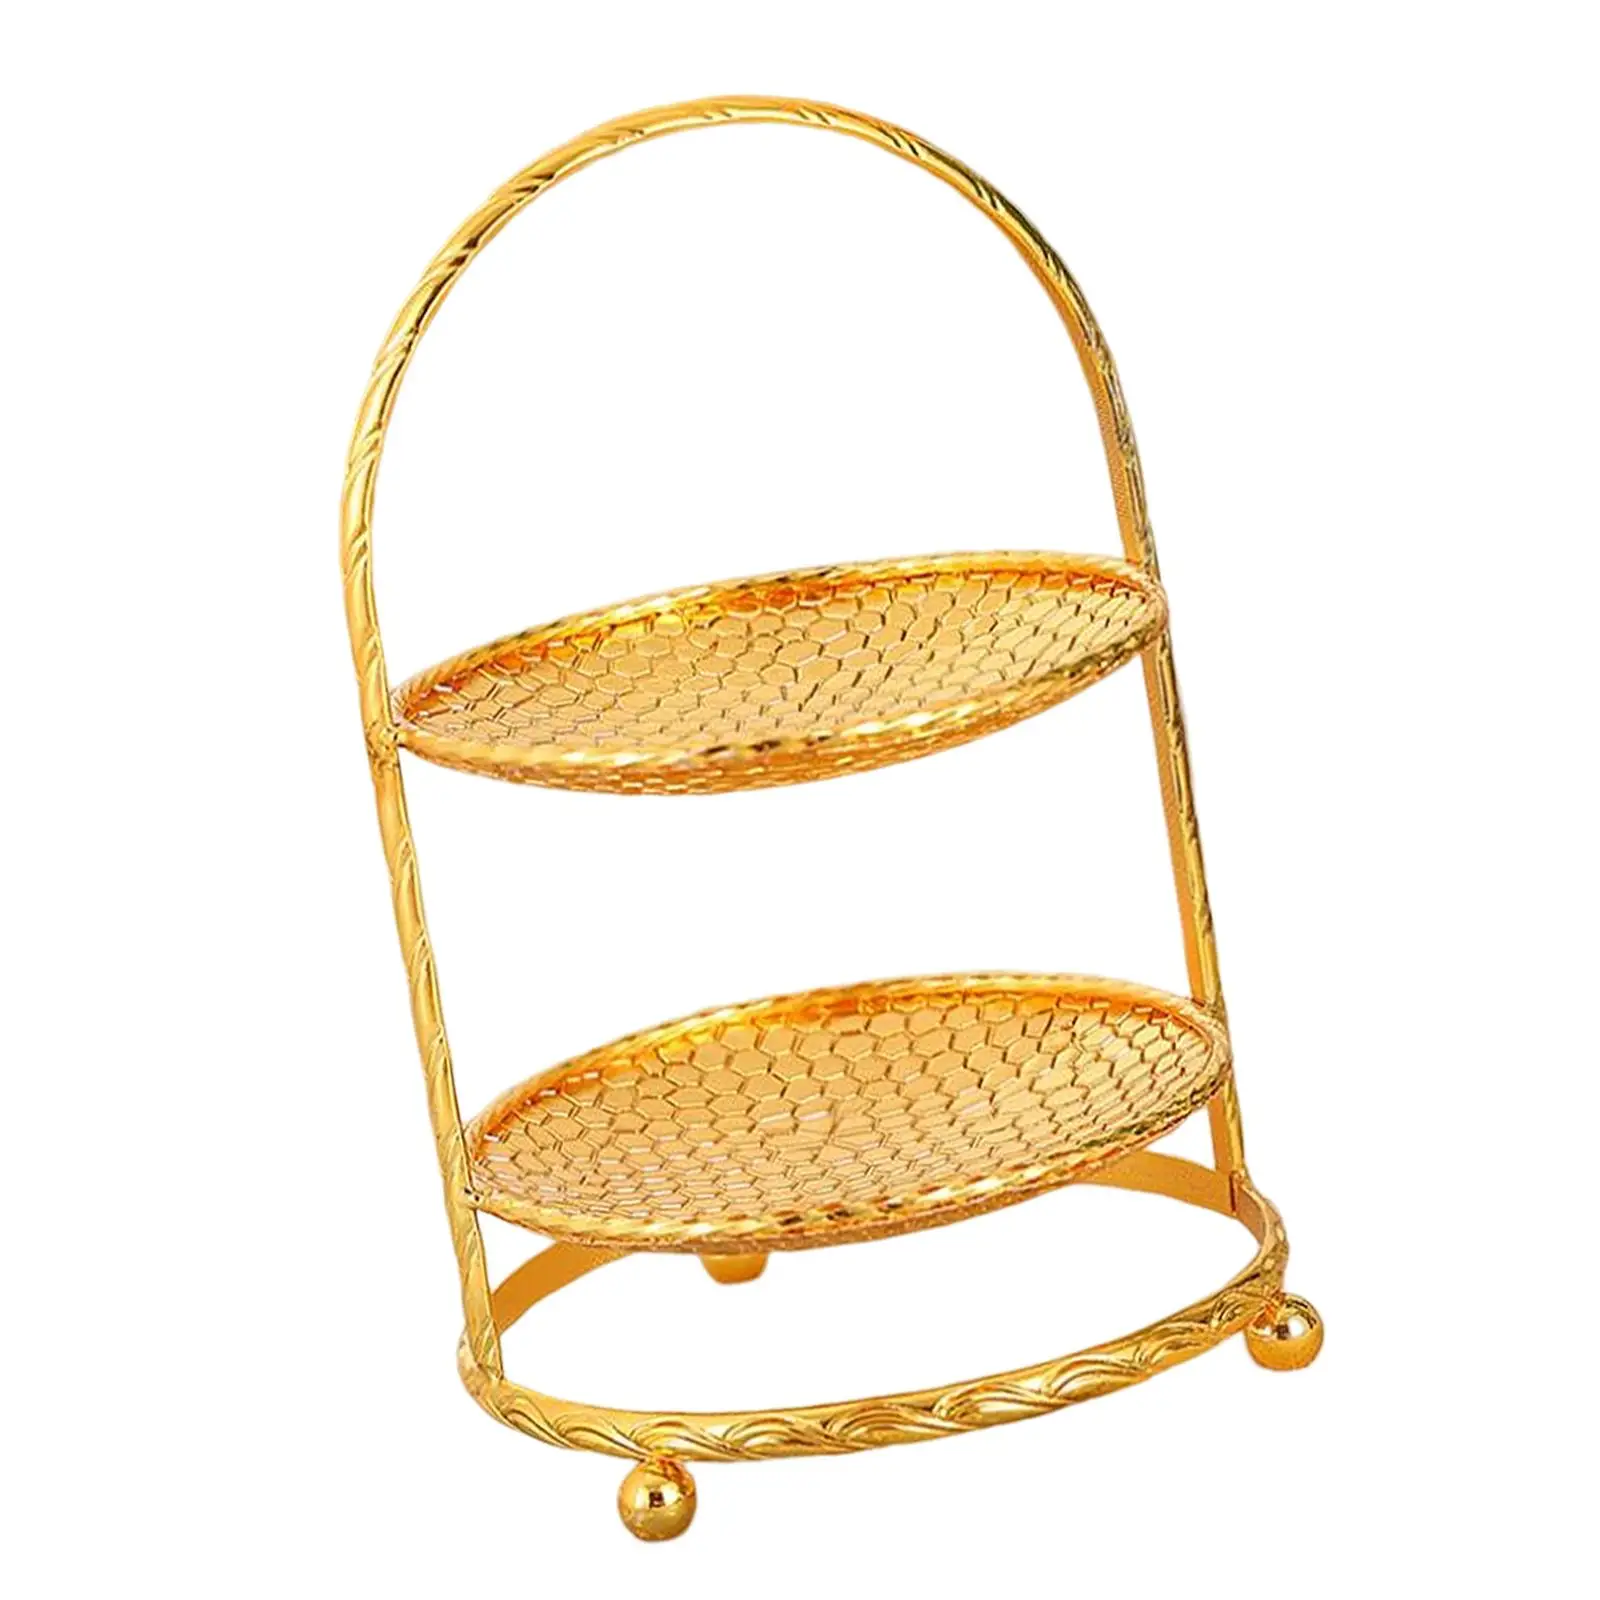 Golden 2 Tiered Cake Stand Tea Party Serving Platter Elegant Durable for Afternoon Tea ,Easy to Carry and Storage Widely Use